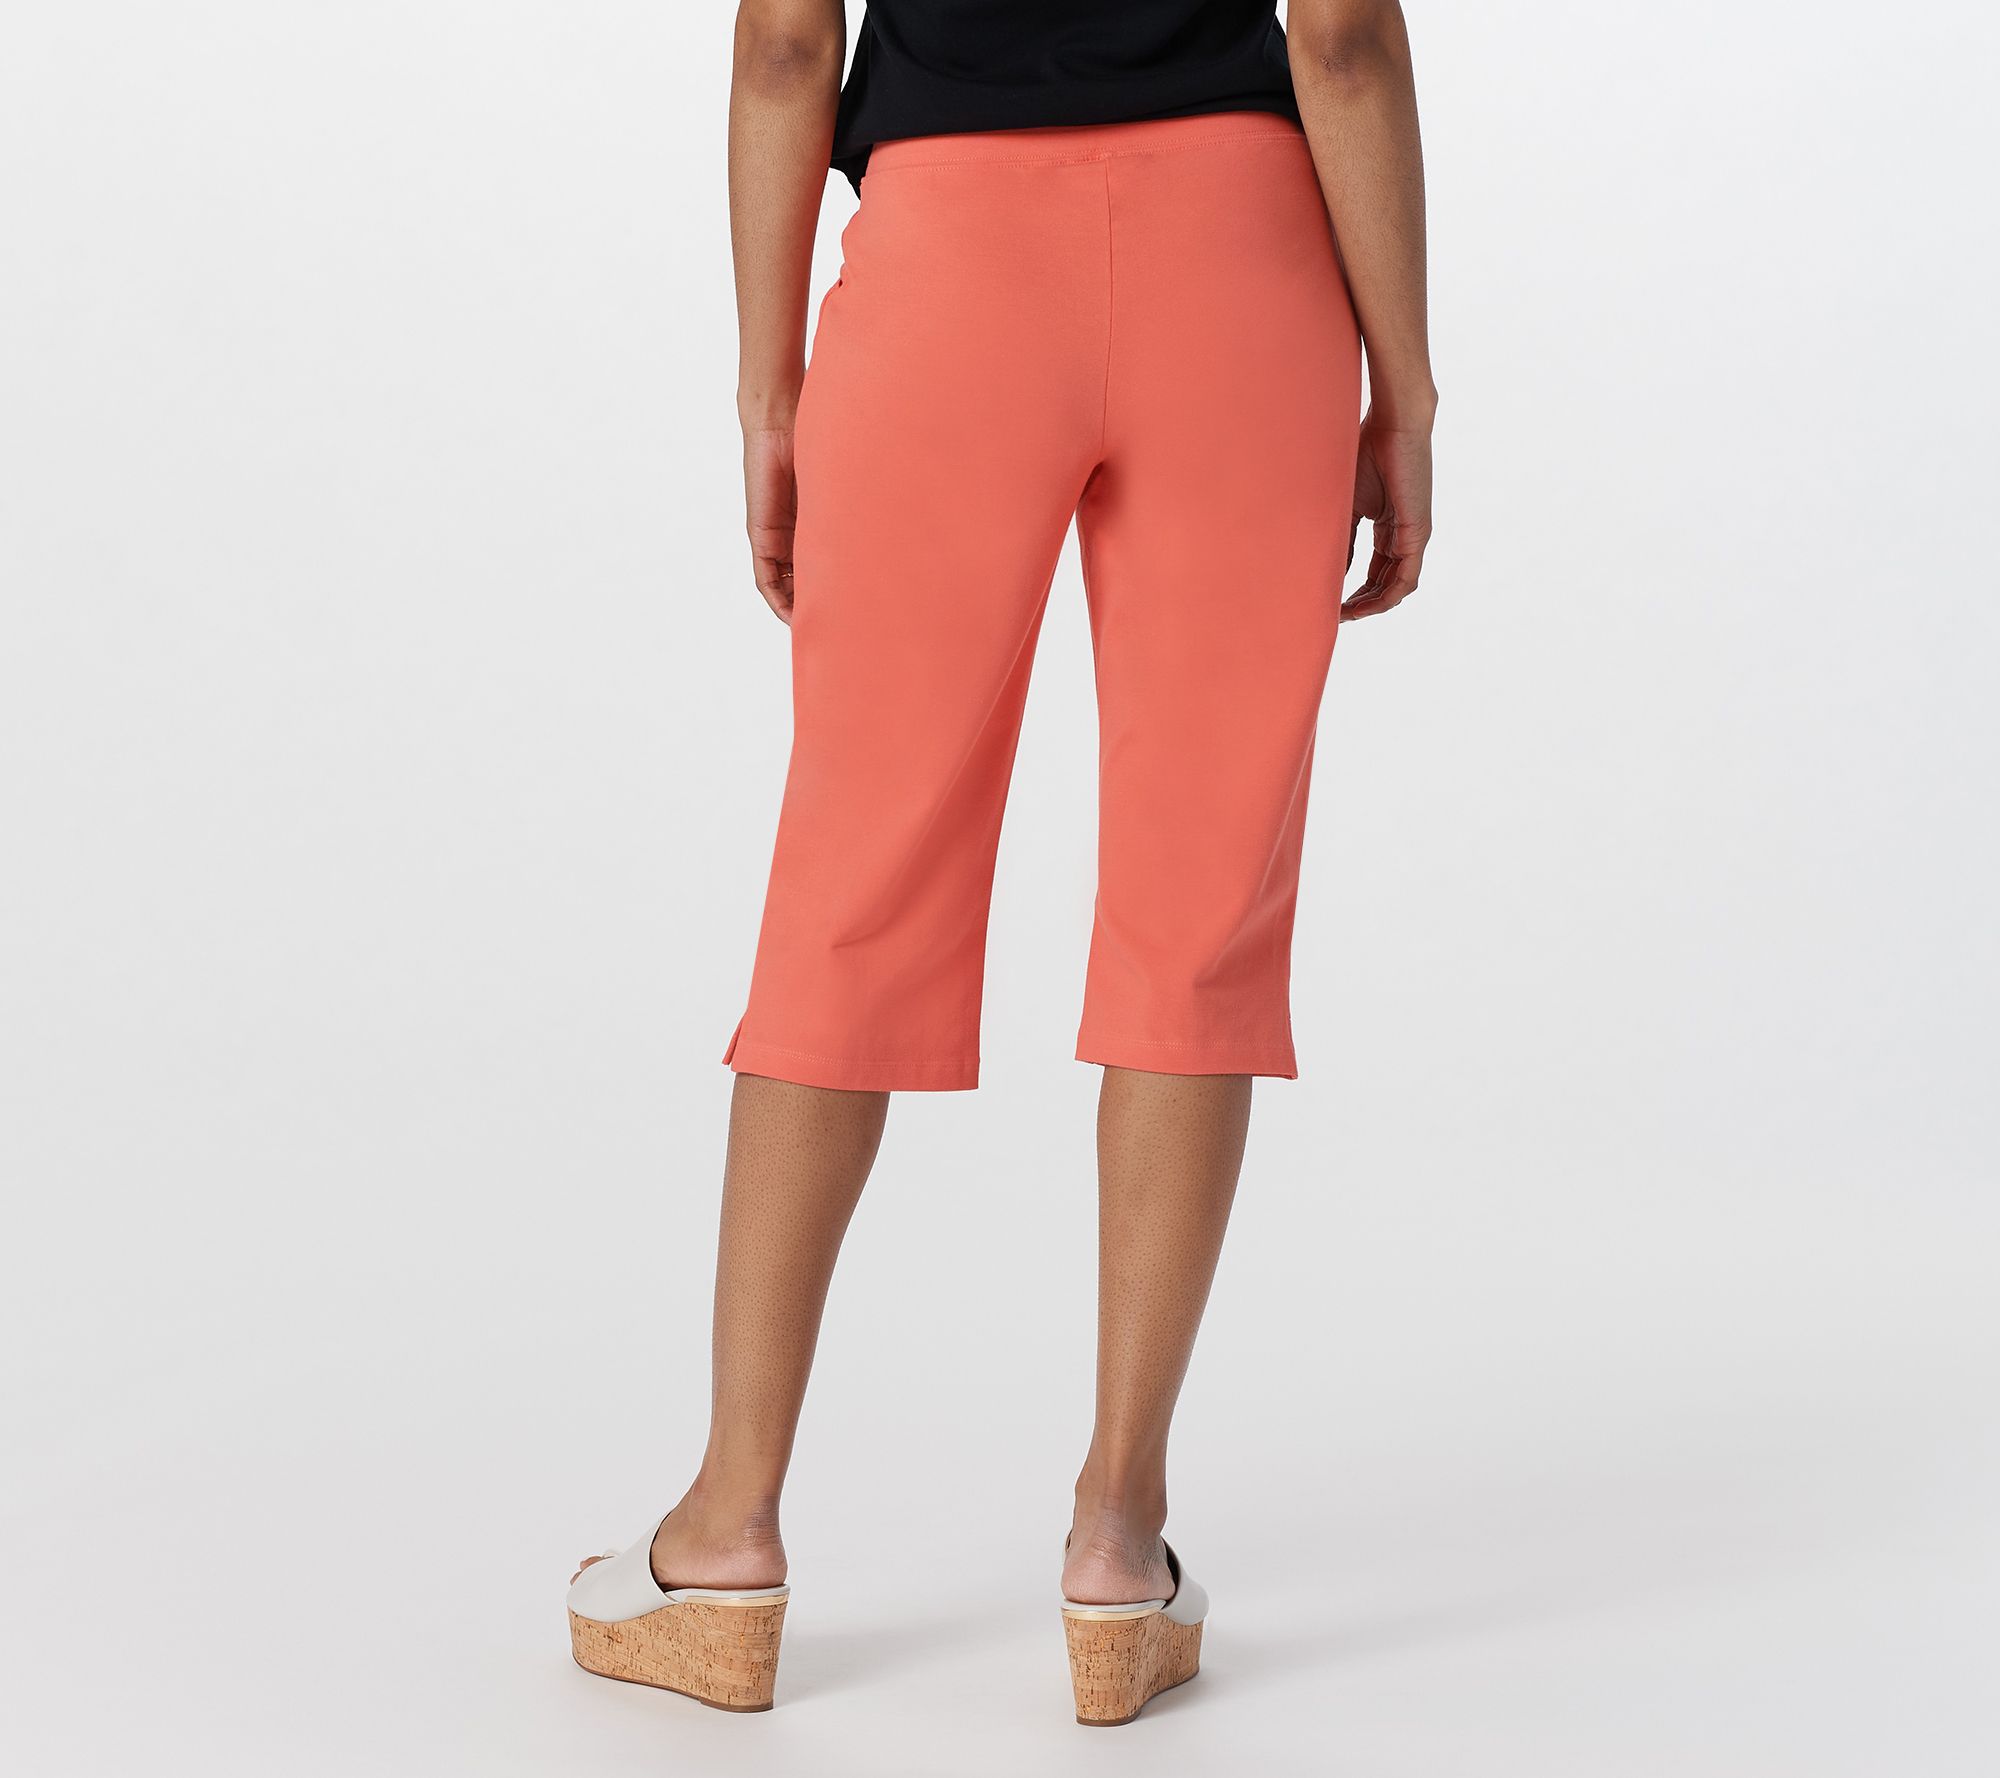 Denim & Co. Active Tall Duo Stretch Skimmer Pants with Pockets - QVC.com